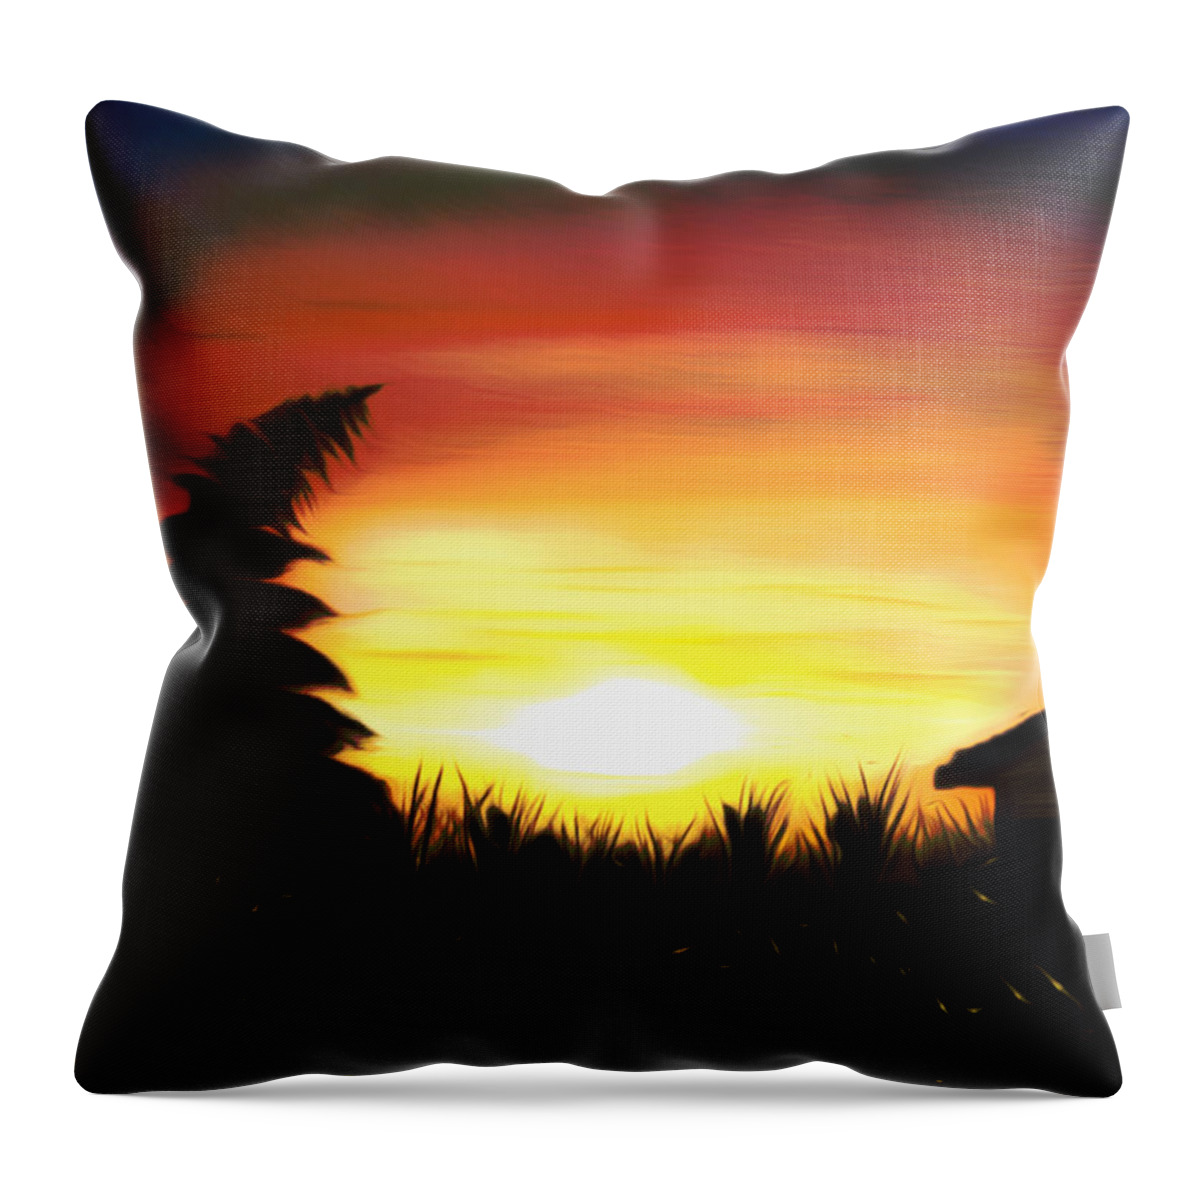 Firefly Throw Pillow featuring the painting Firefly Frenzy Dreamy Mirage by Claude Beaulac